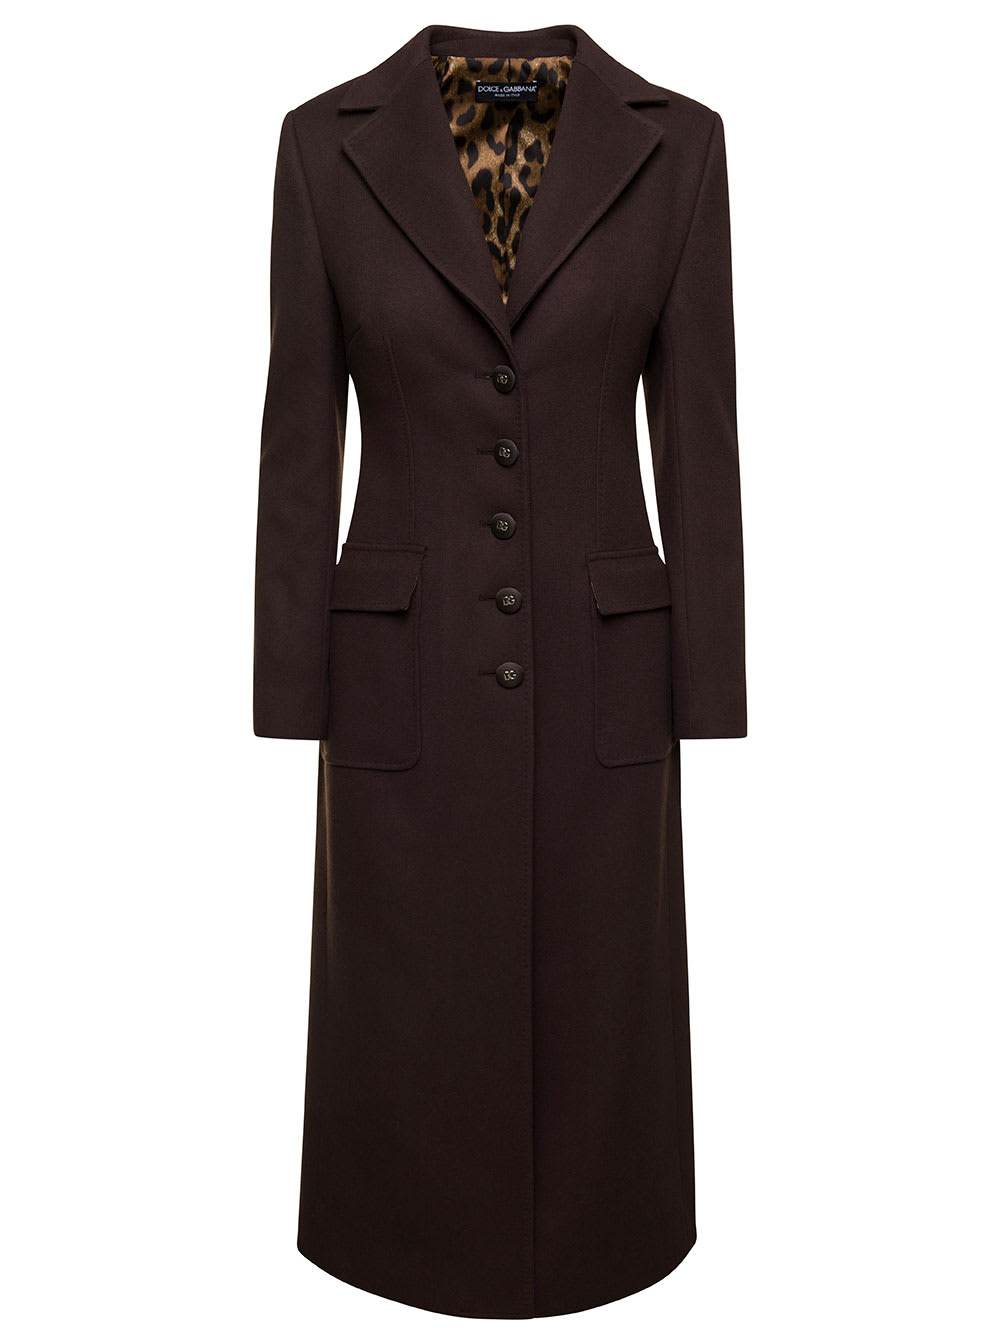 DOLCE & GABBANA BROWN SLIM SINGLE-BREASTED COAT WITH BRANDED BUTTONS IN WOOL AND CASHMERE WOMAN